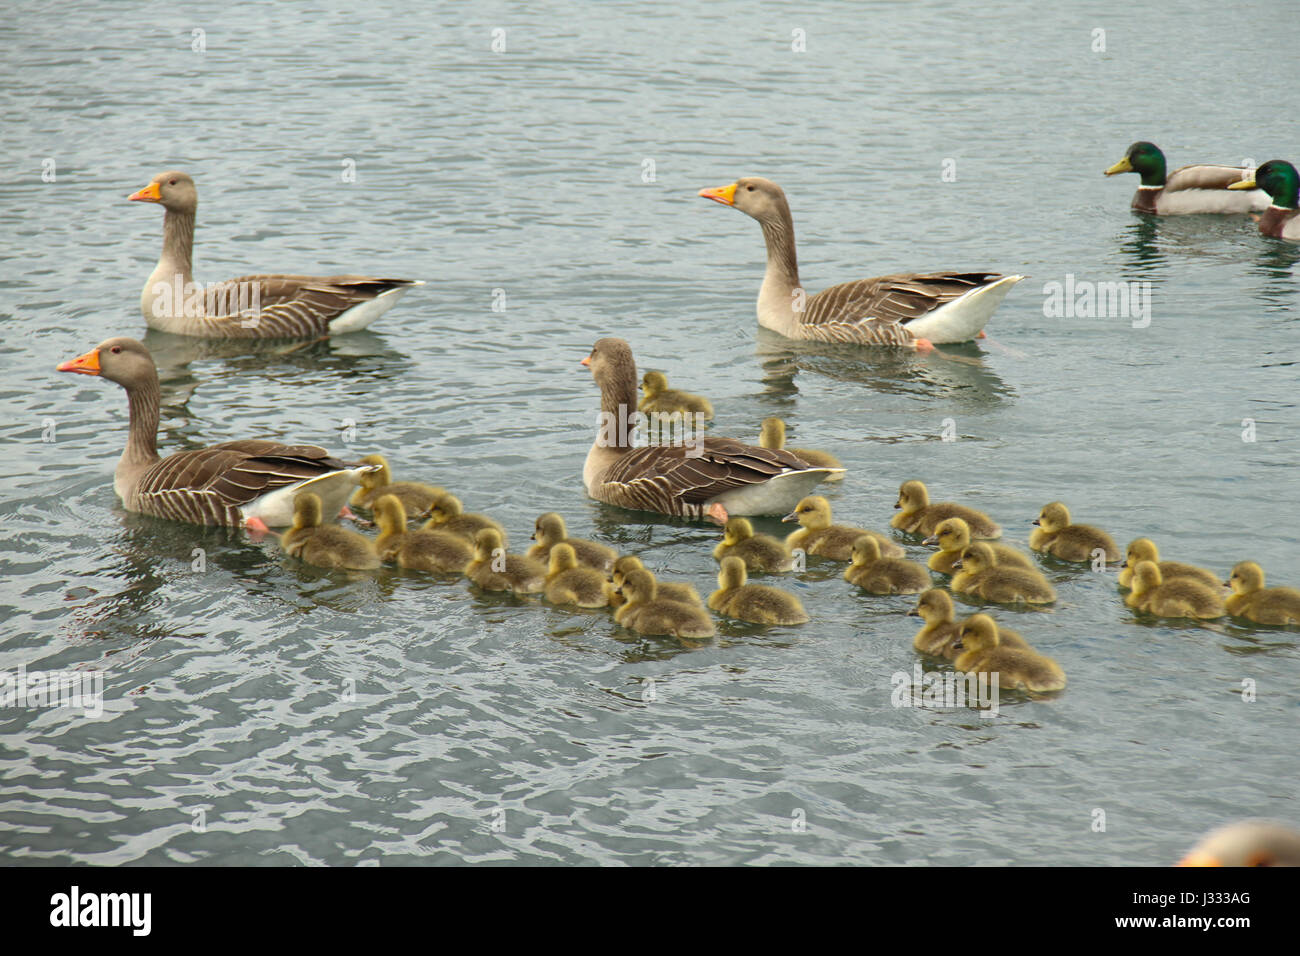 London, United Kingdom - May 1: A gaggle of Canadian geese and ducks swim on the lake at Fairlop Waters, a large country park and leisure facility located in East London.© David Mbiyu/Alamy Live News Stock Photo